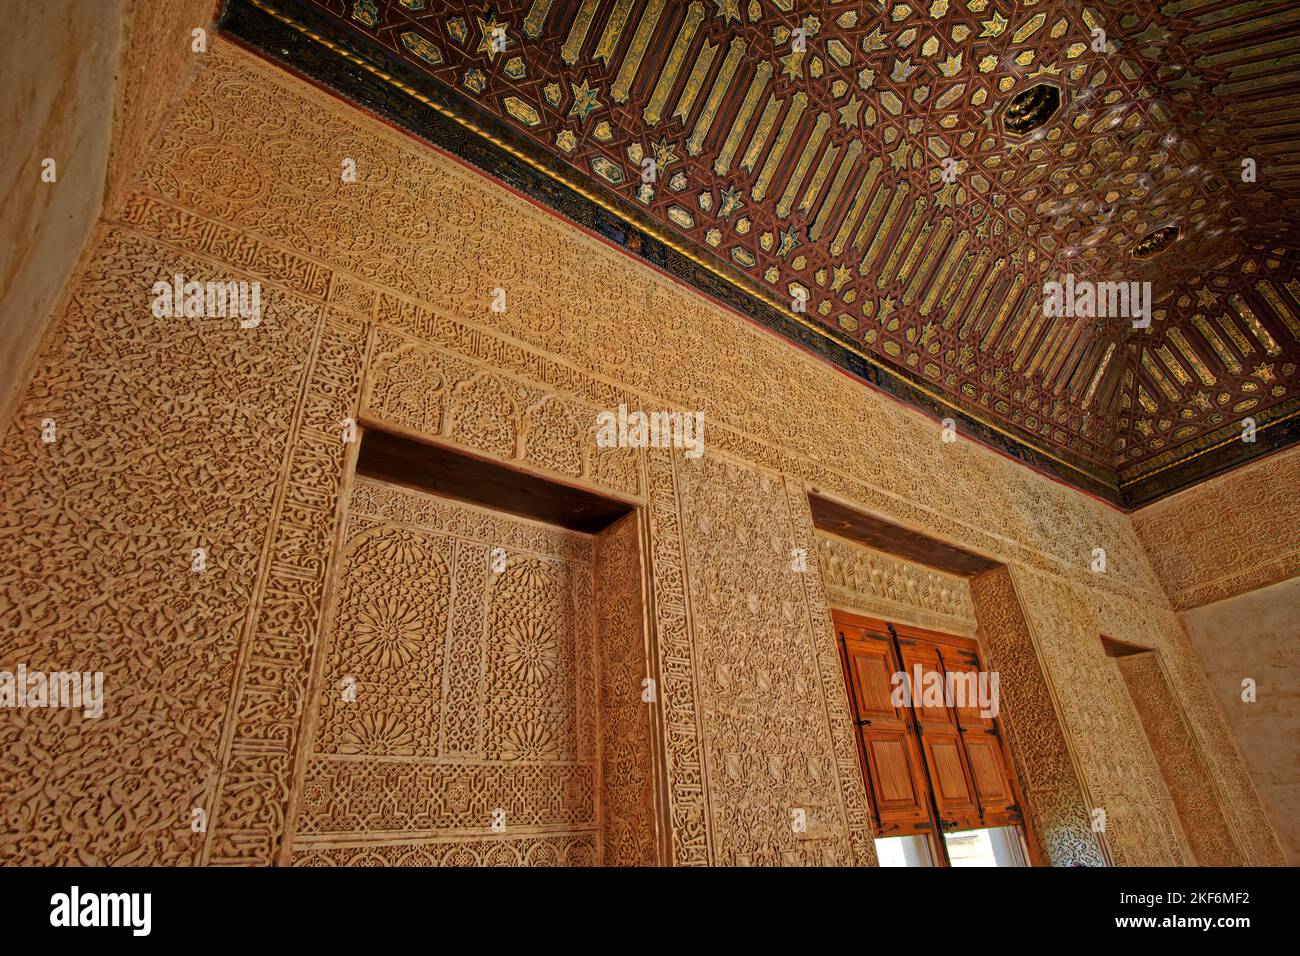 Architectural detail of the Palace buildings  at the Alhambra palace complex at Granada, Spain. Stock Photo